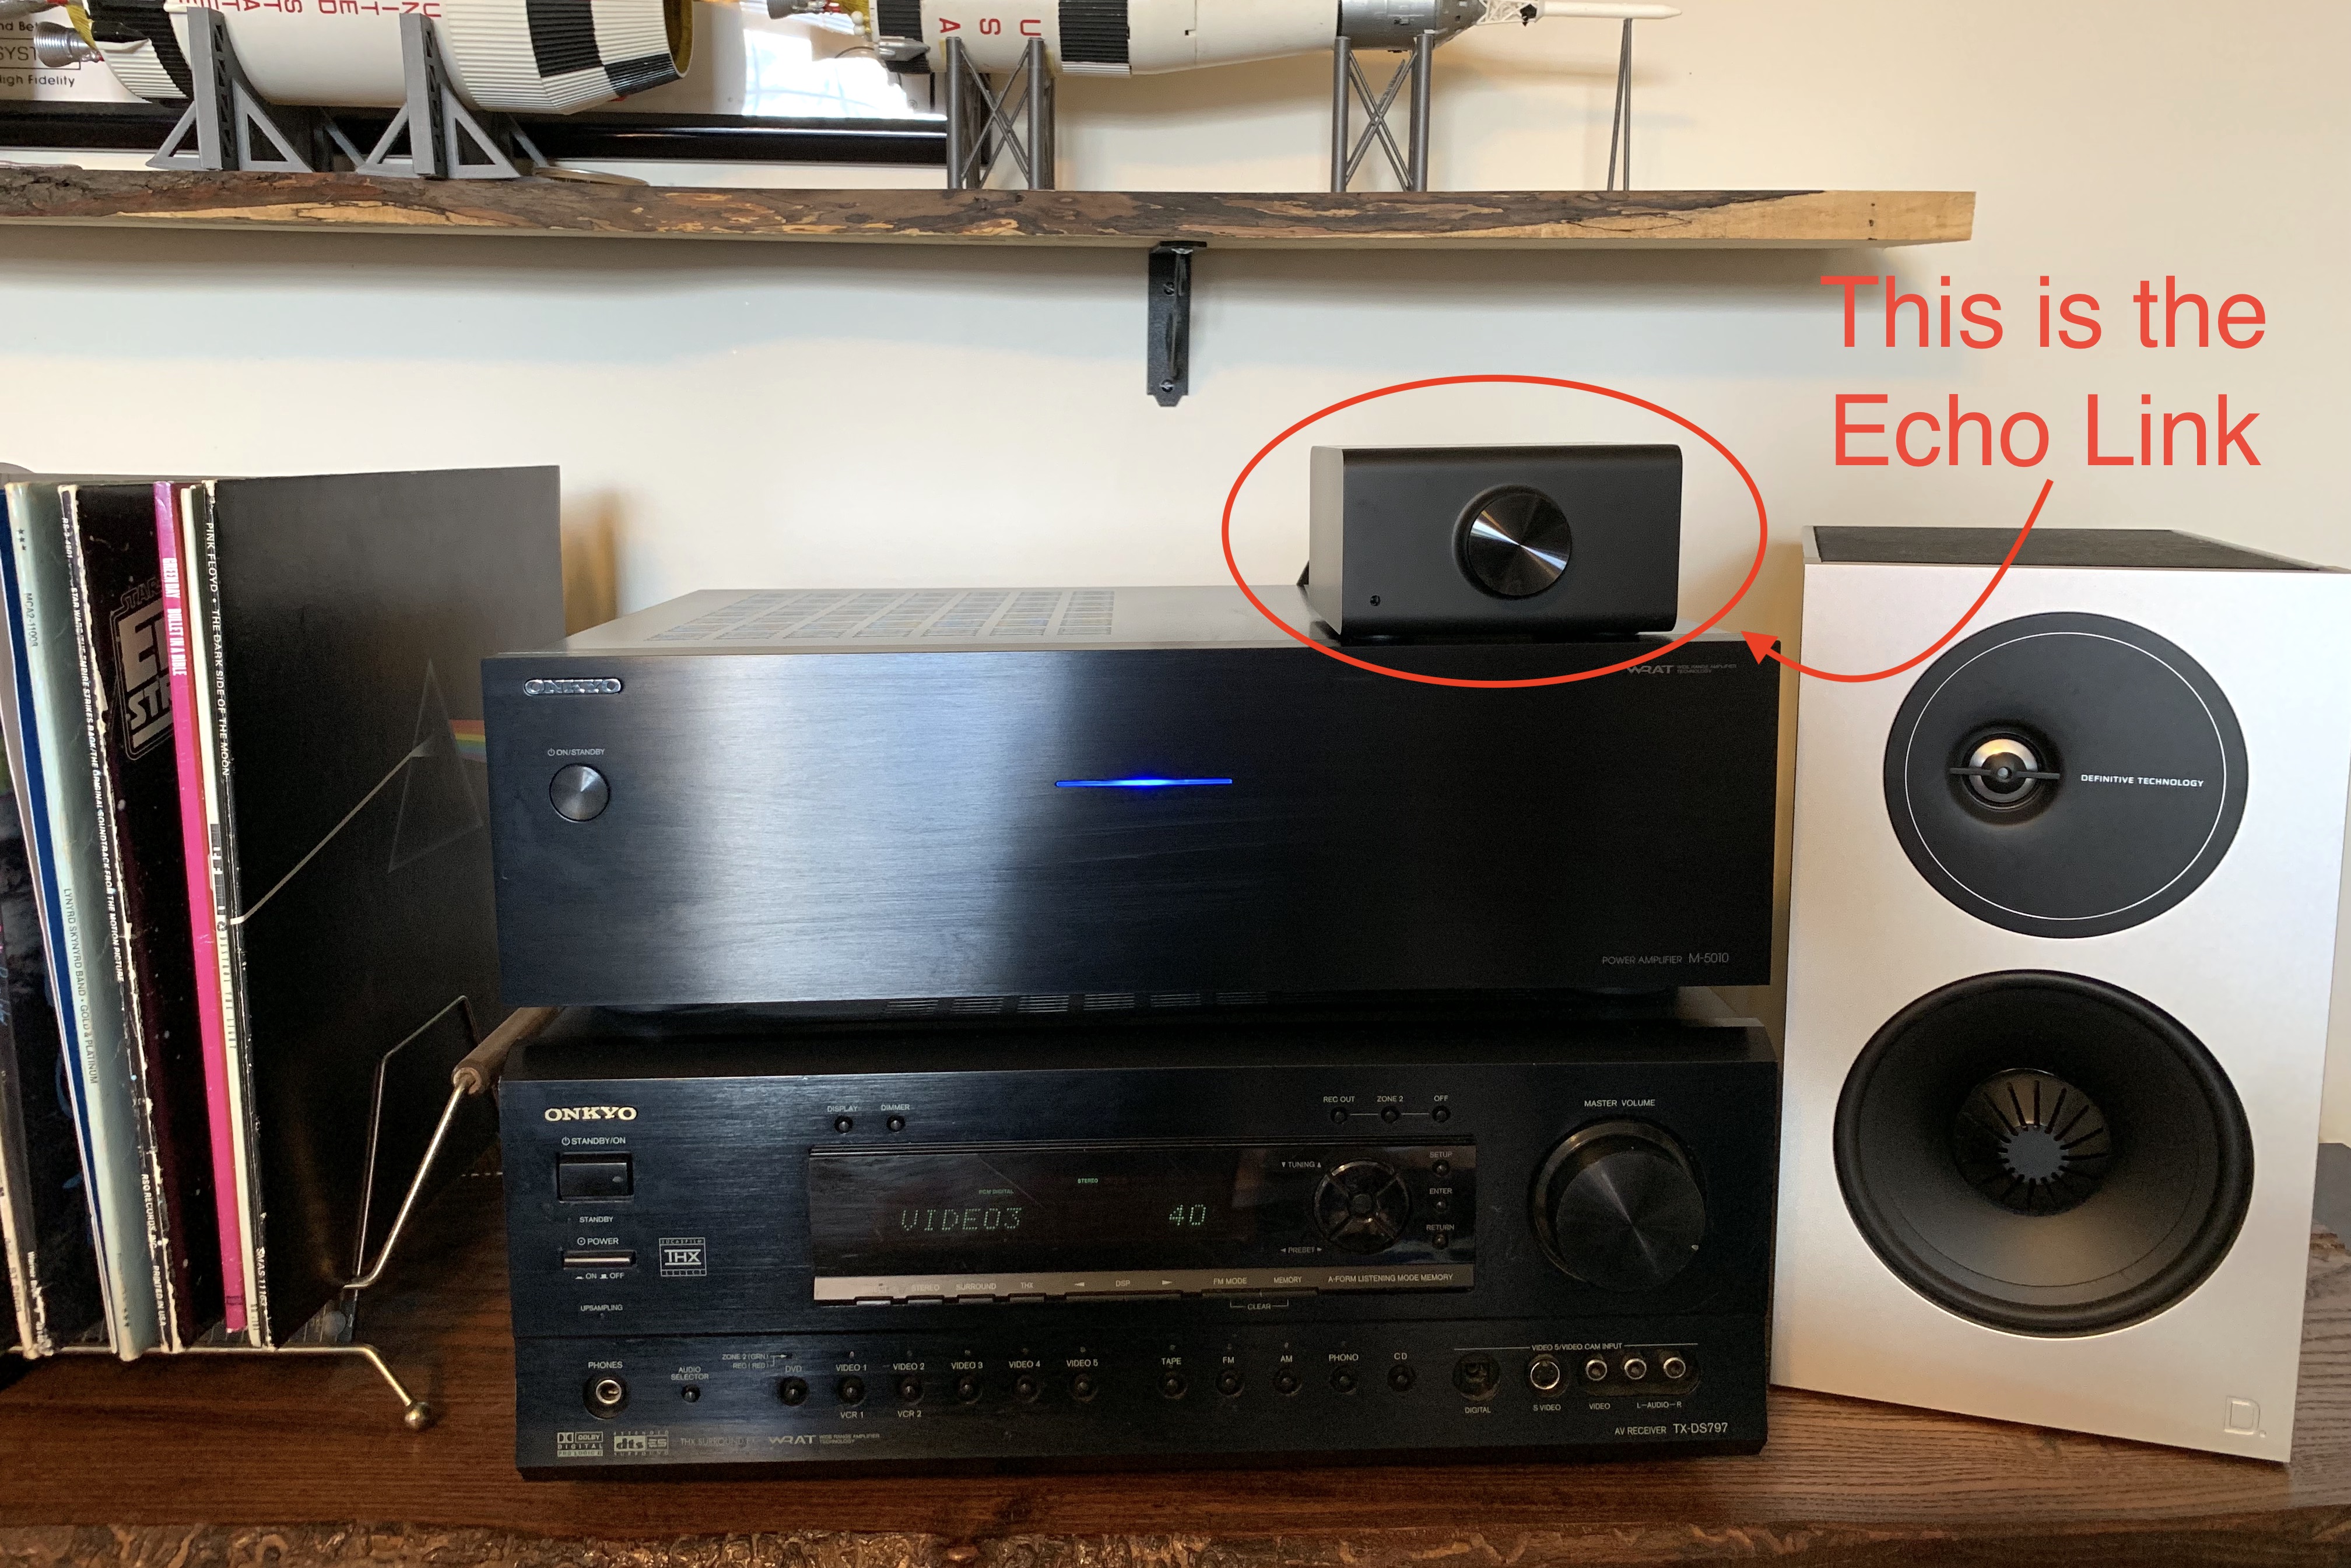 Review: The $199 Echo Link turns the fidelity up to 11 | TechCrunch